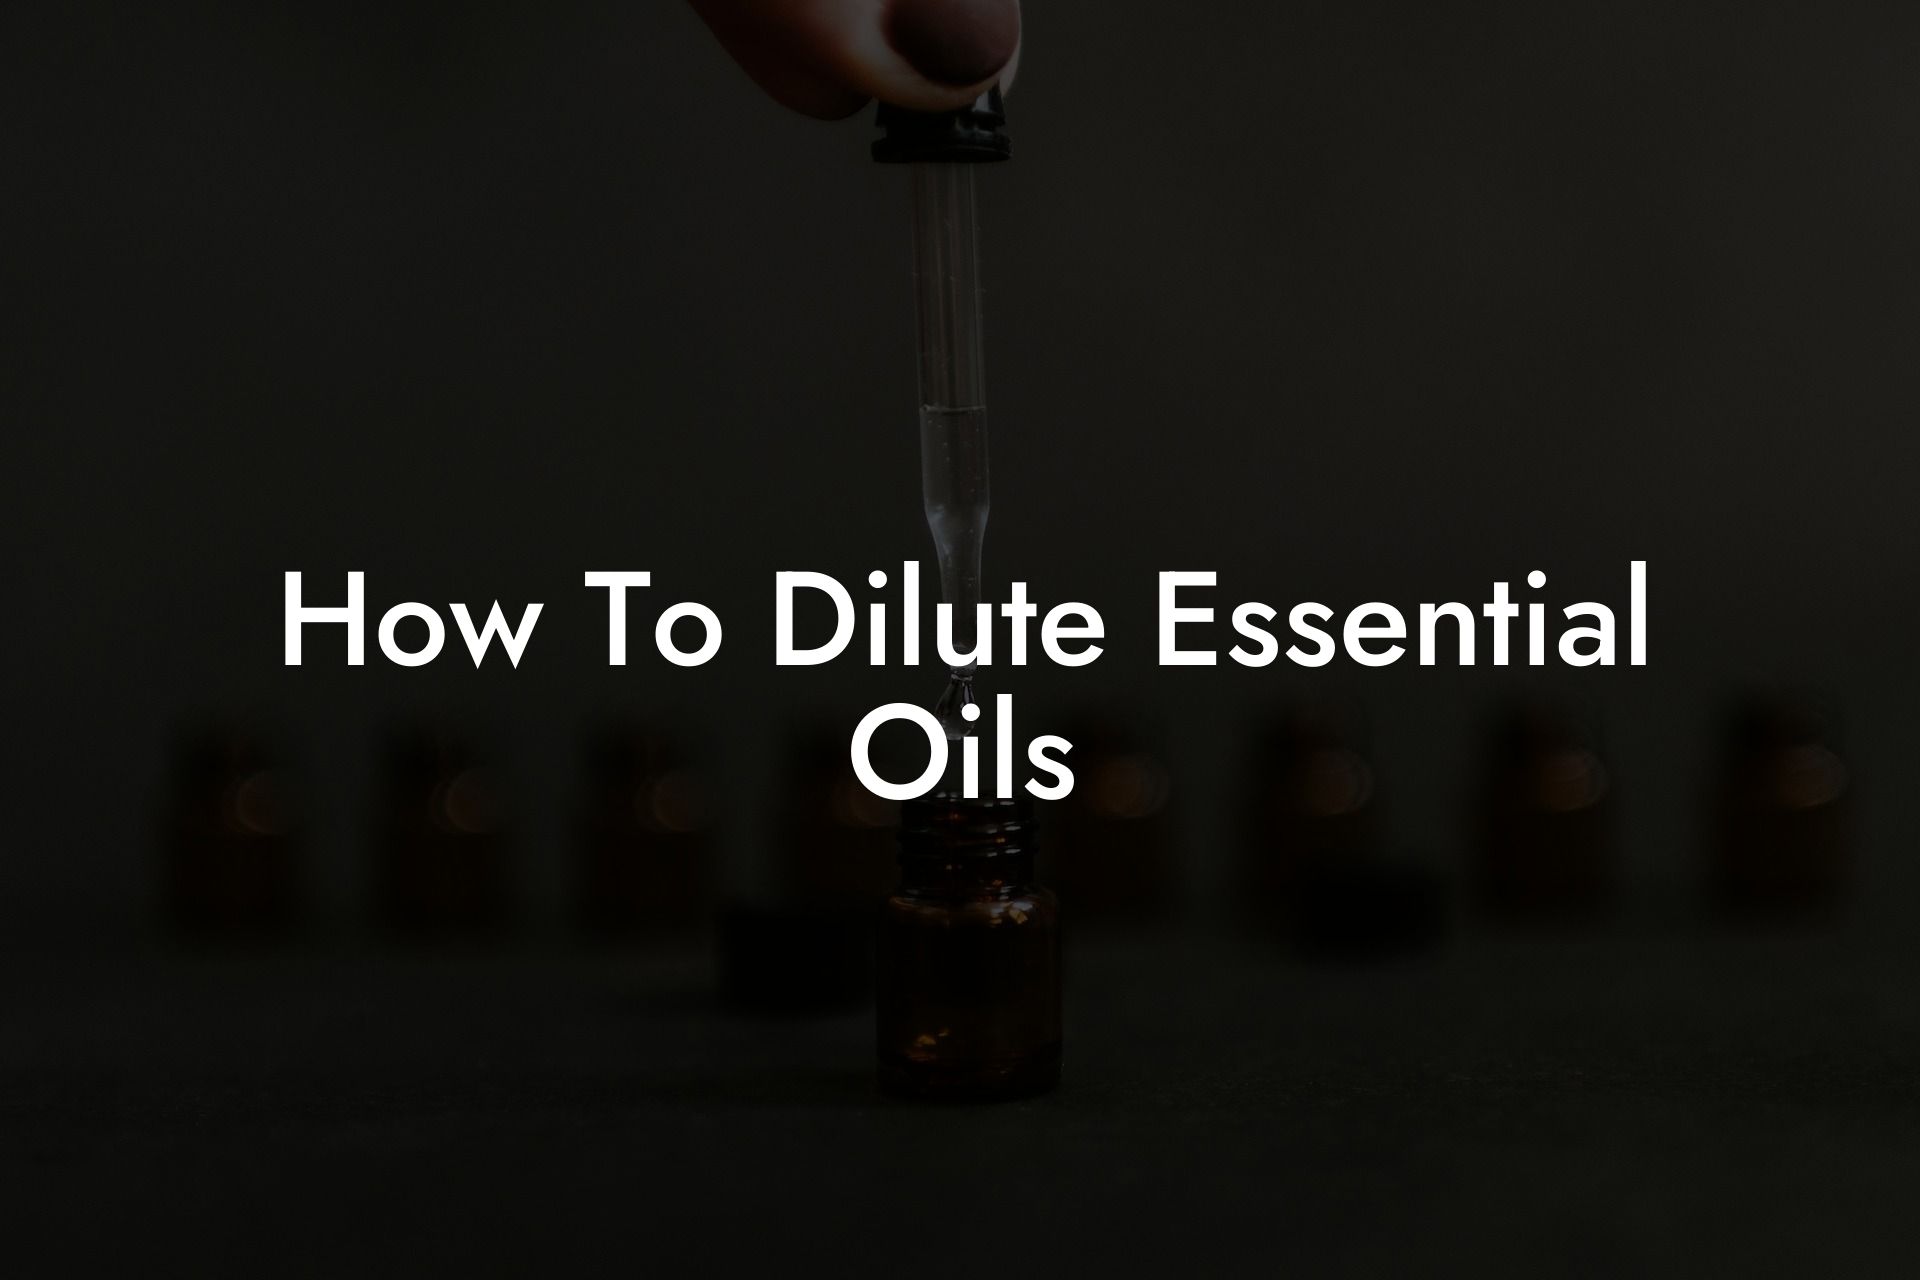 How To Dilute Essential Oils